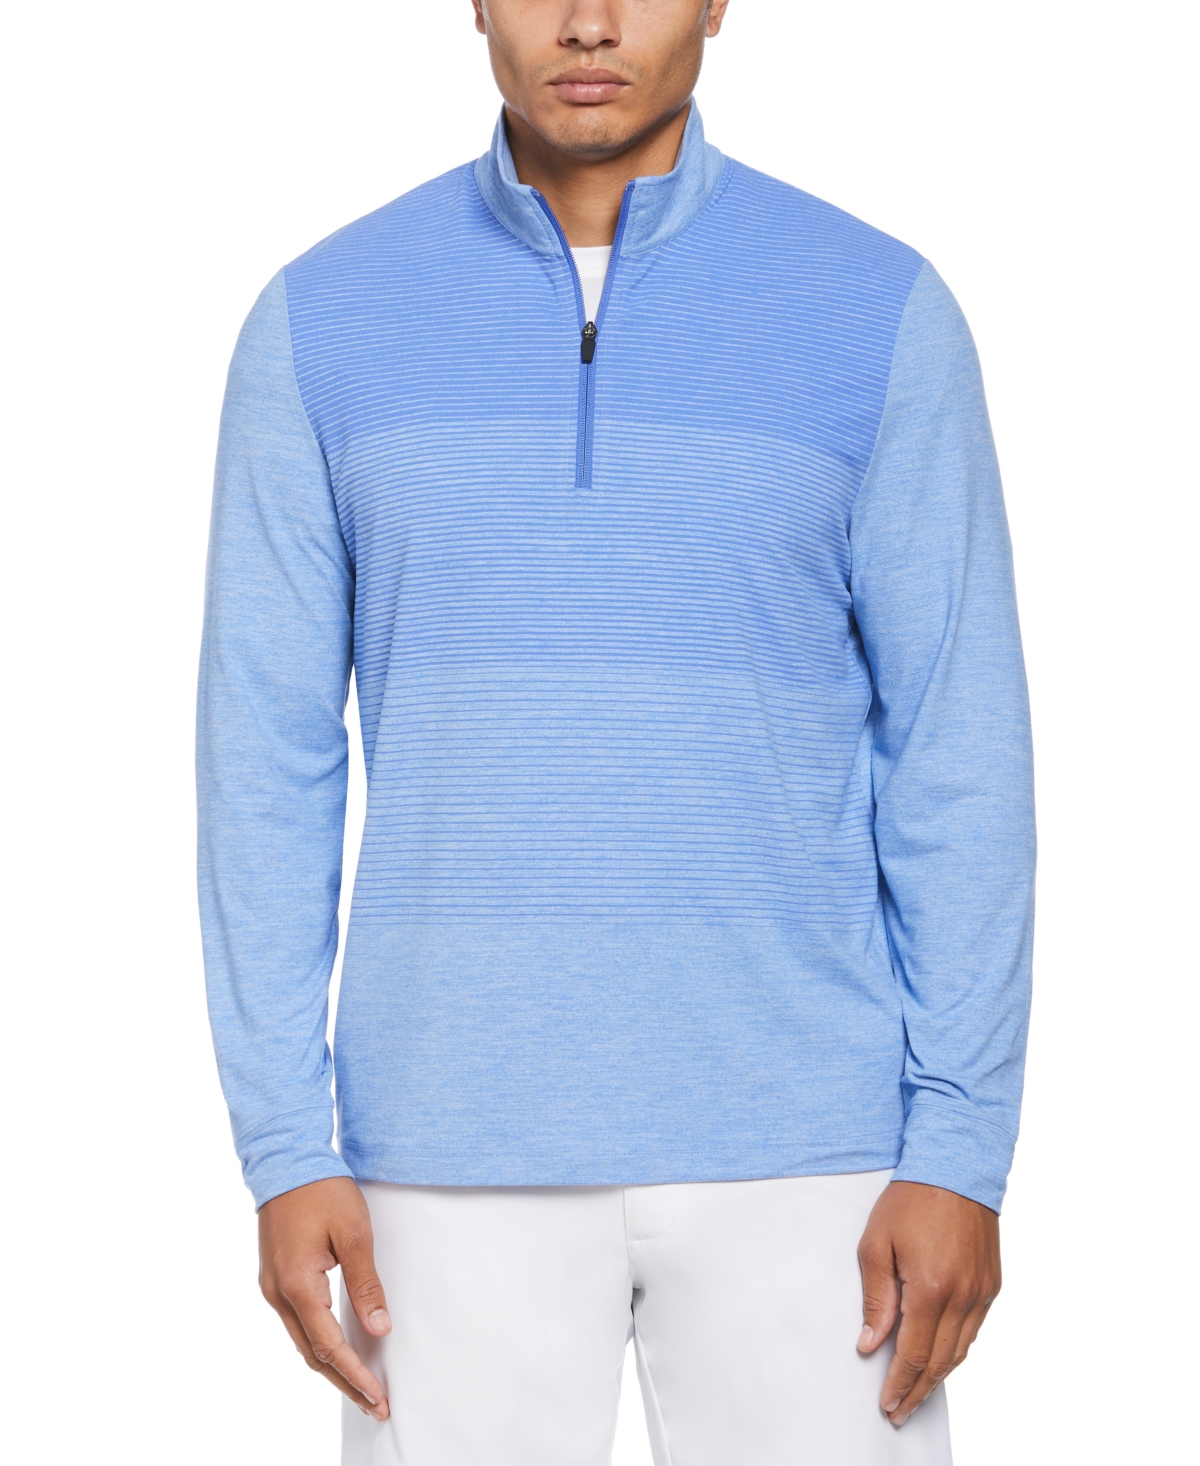 Men's Lux Touch Ombre Golf Sweater - Ultra Marine Heather